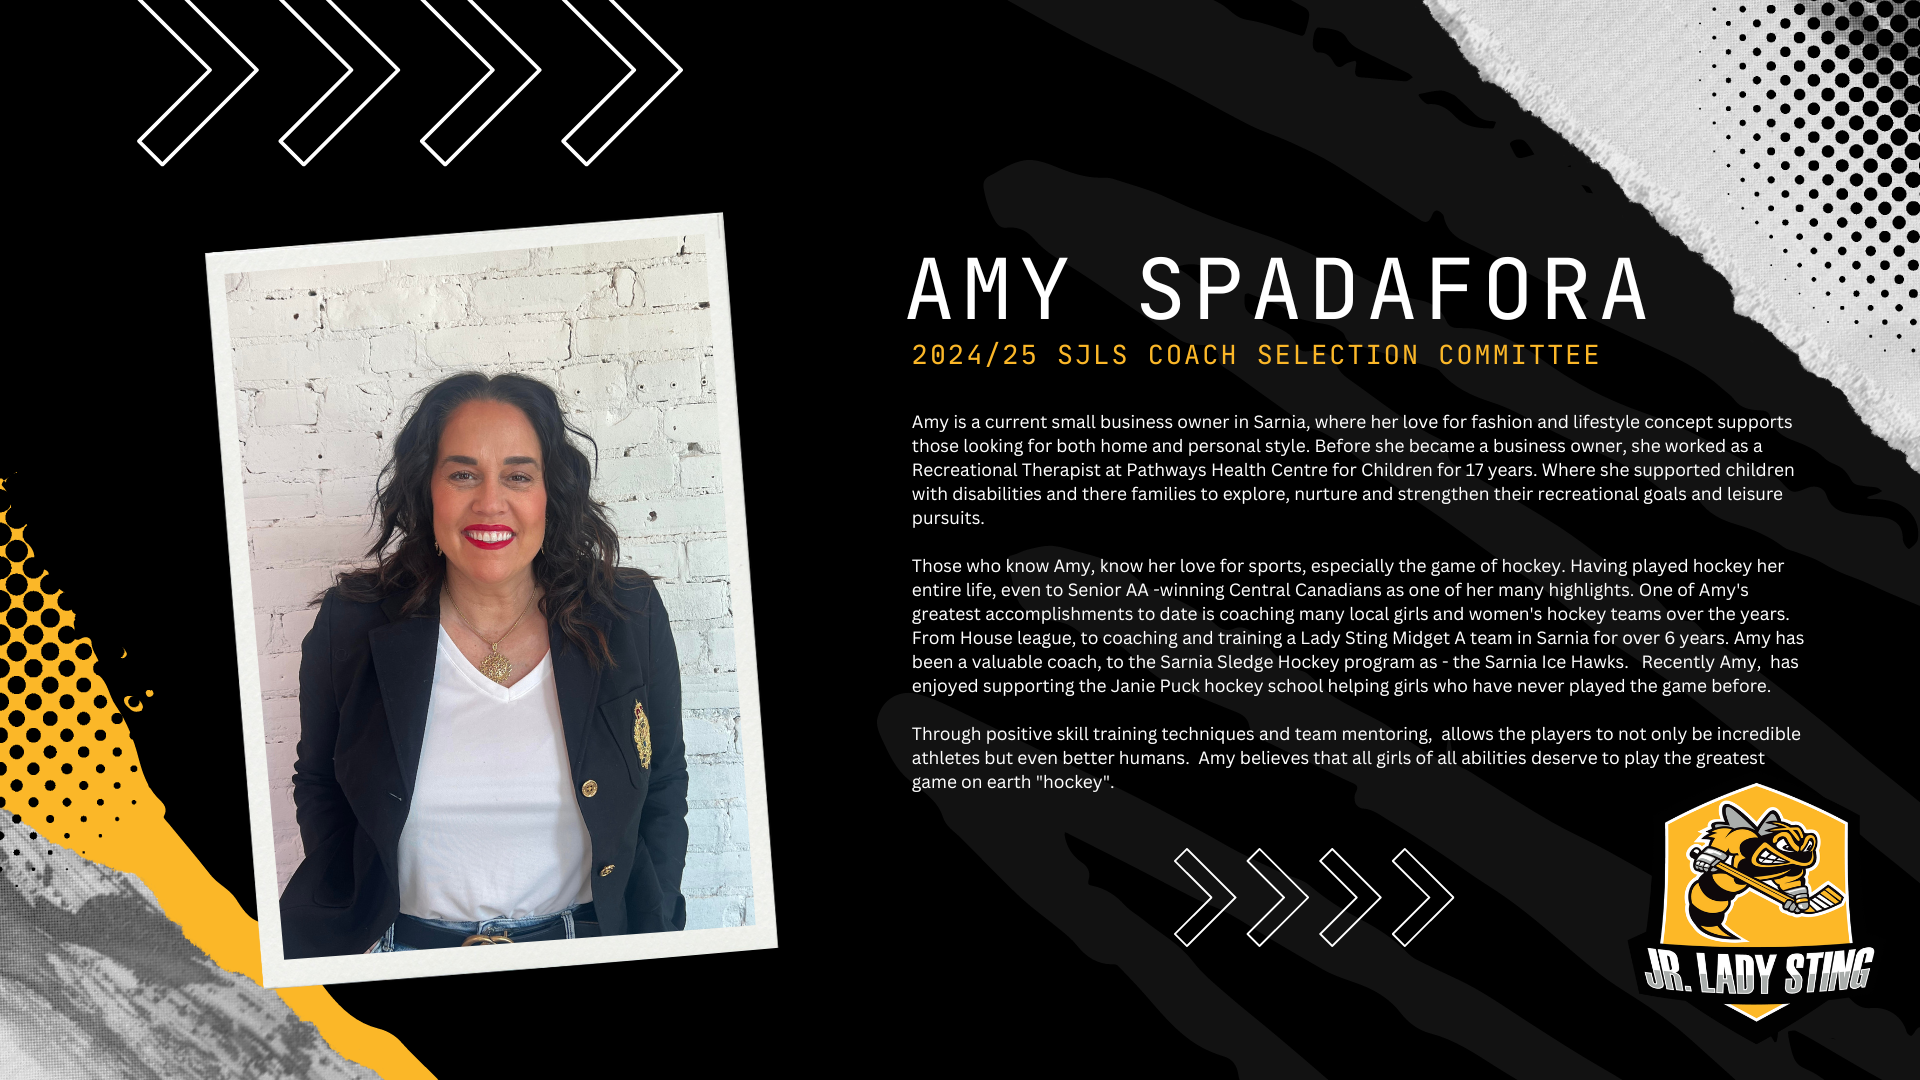 Amy_Spadafora_Coach_Selection_Committee_(1).png